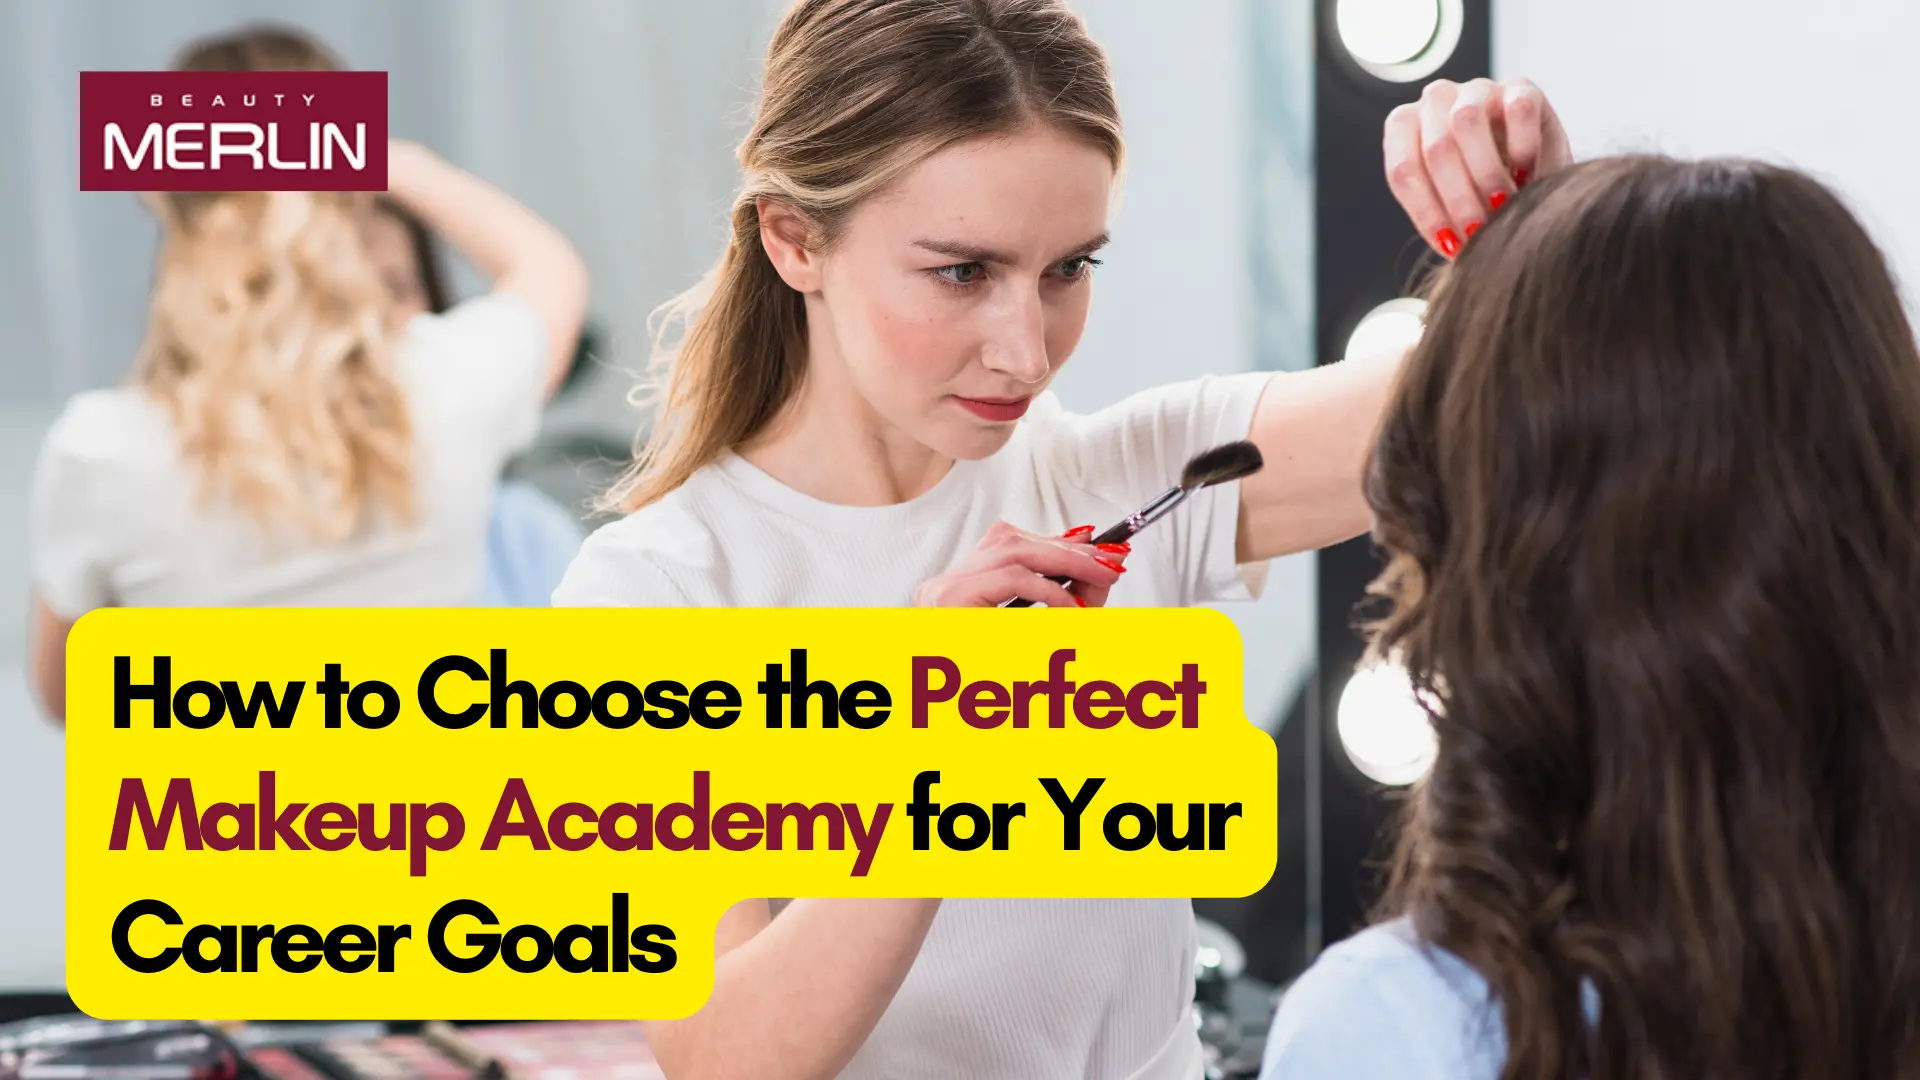 How to Choose the Perfect Makeup Academy for Your Career Goals